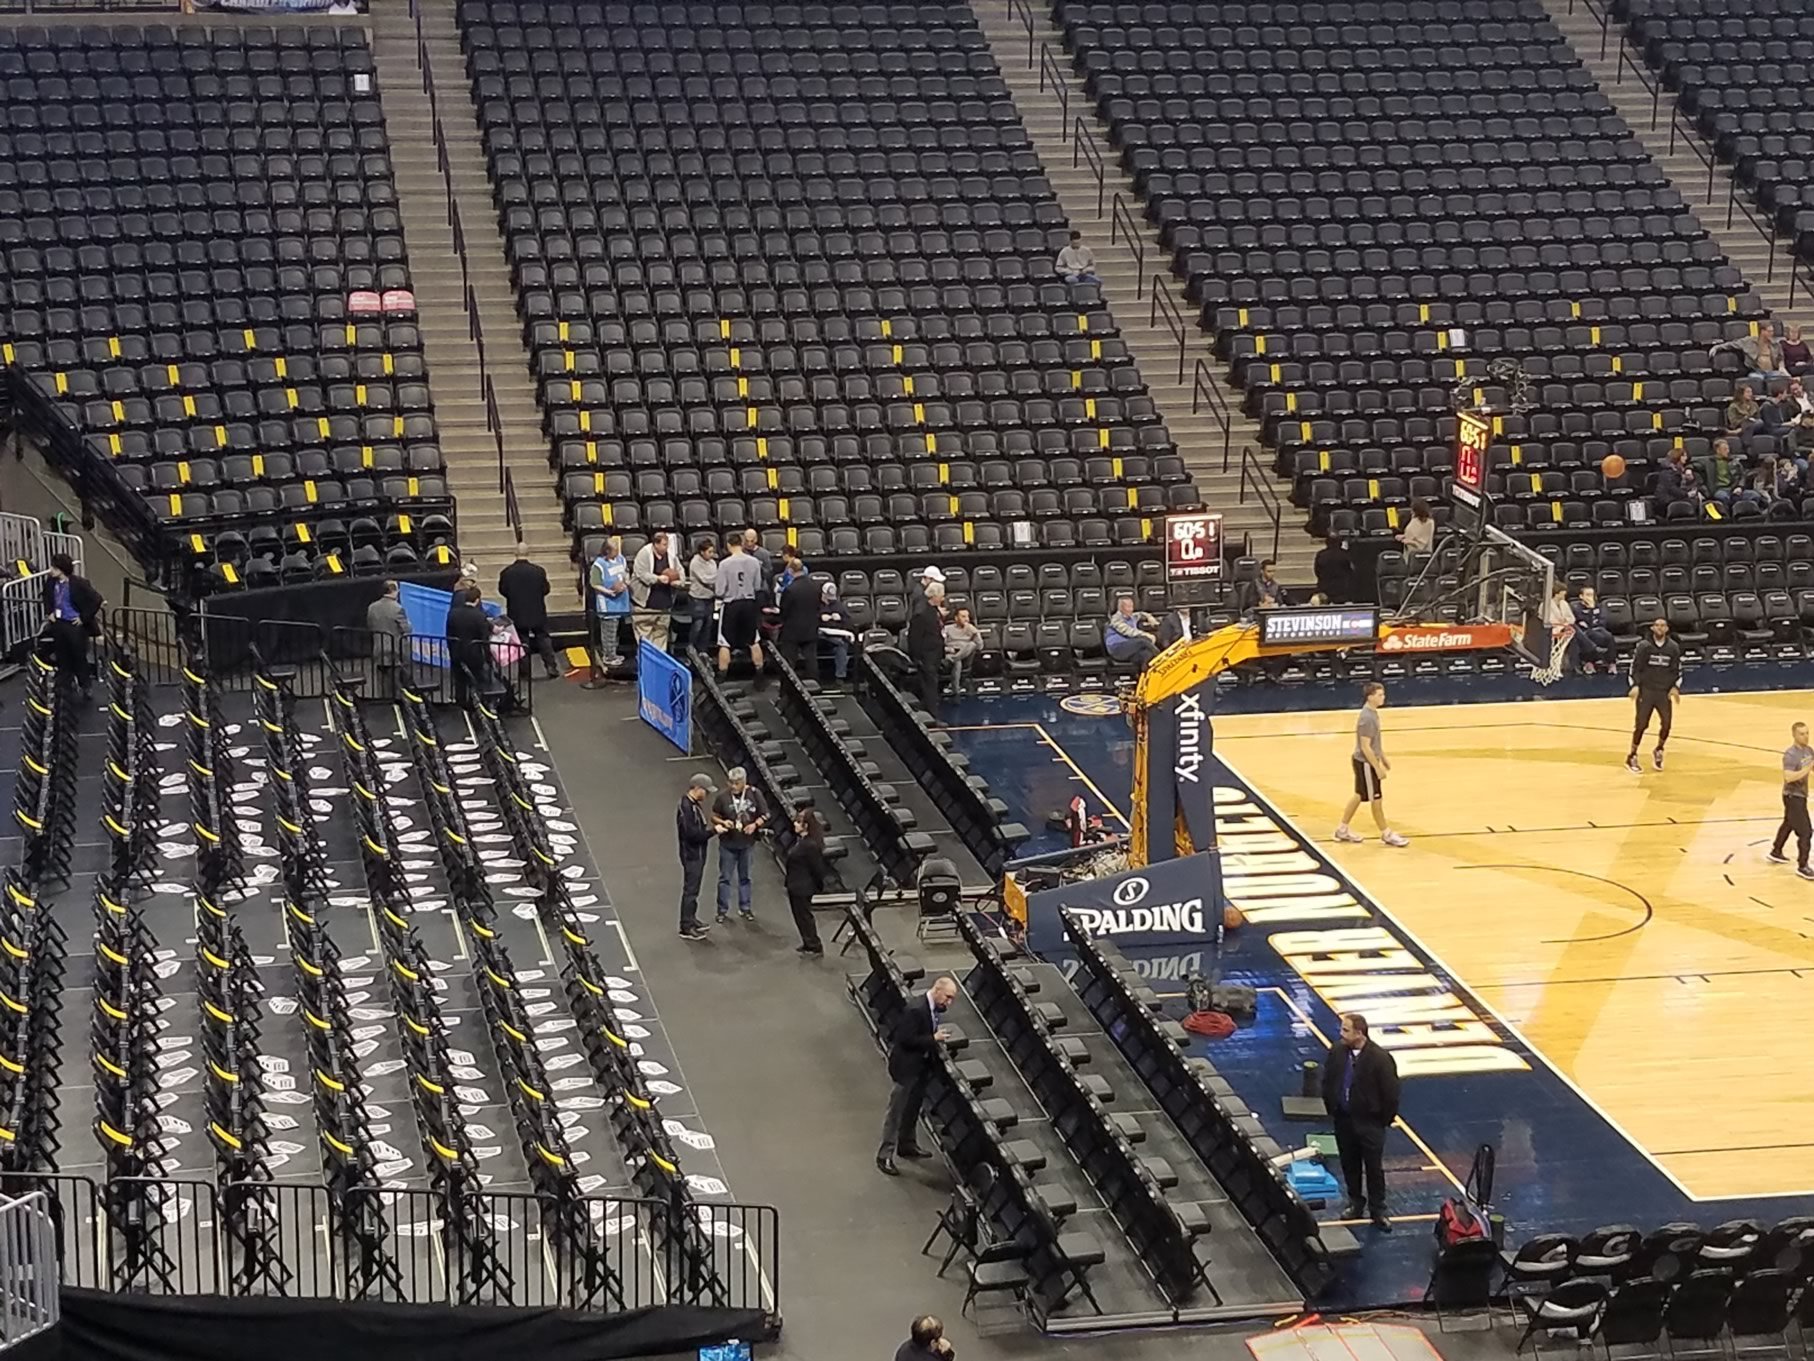 Denver Nuggets Seating Chart Rows